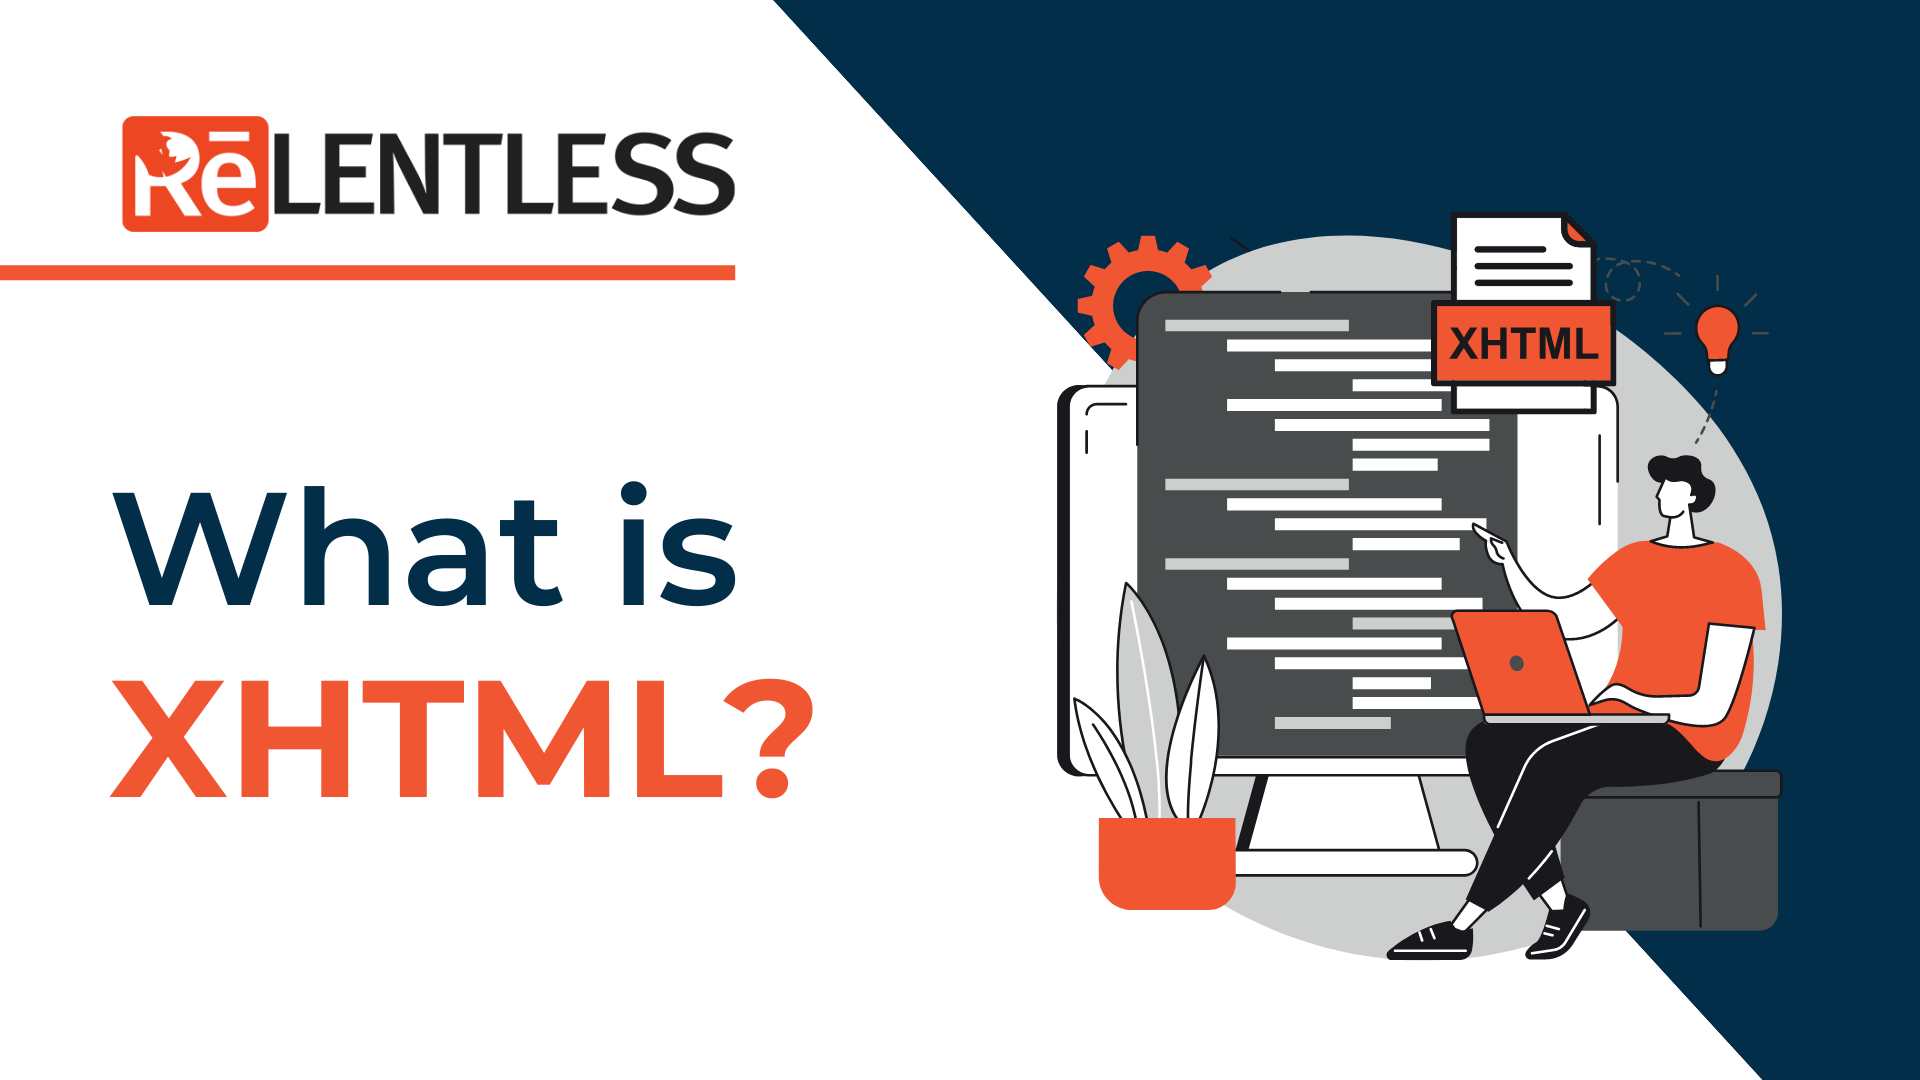 What is XHTML